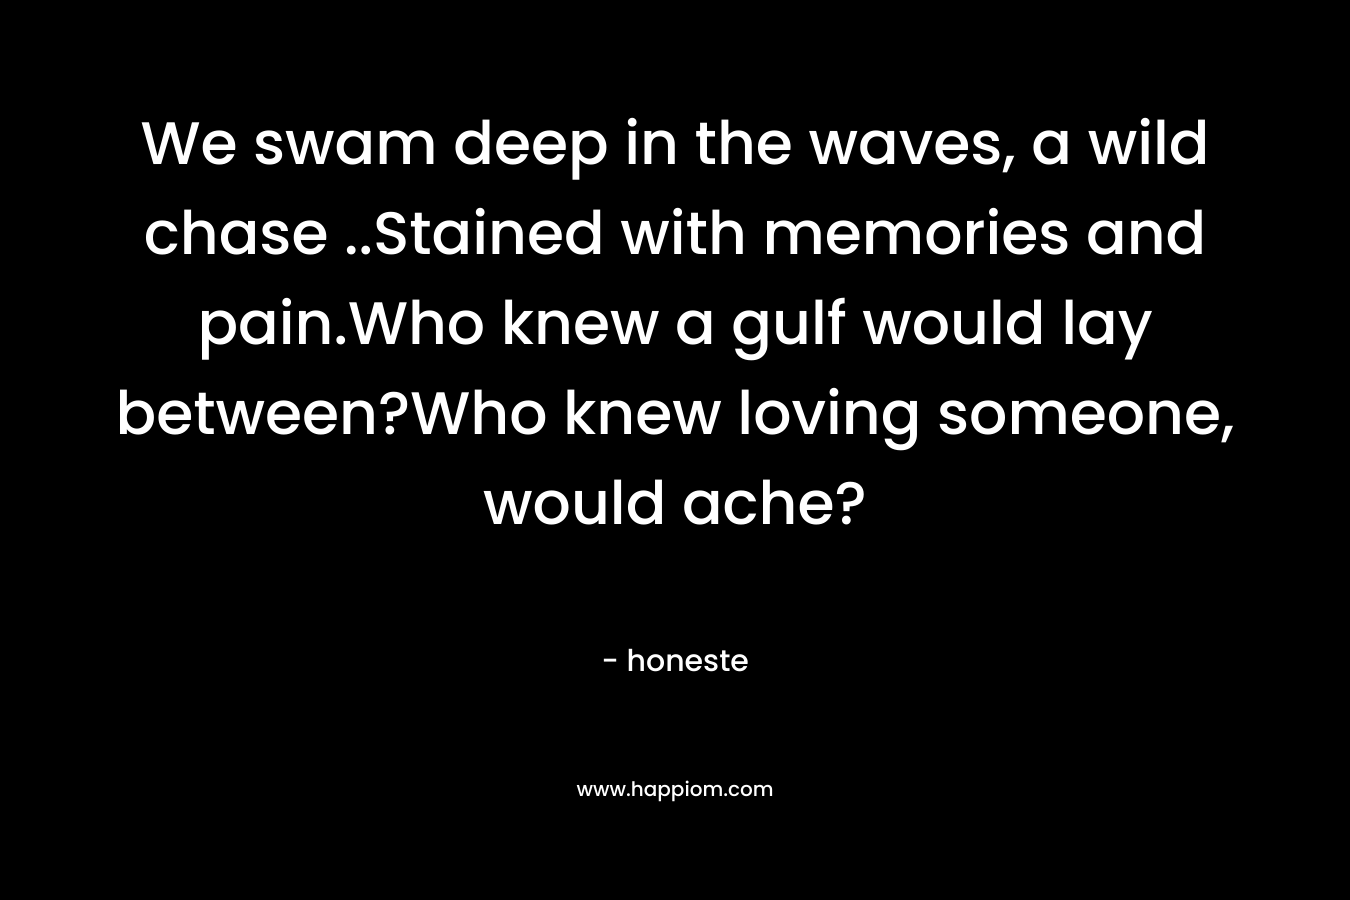 We swam deep in the waves, a wild chase ..Stained with memories and pain.Who knew a gulf would lay between?Who knew loving someone, would ache?